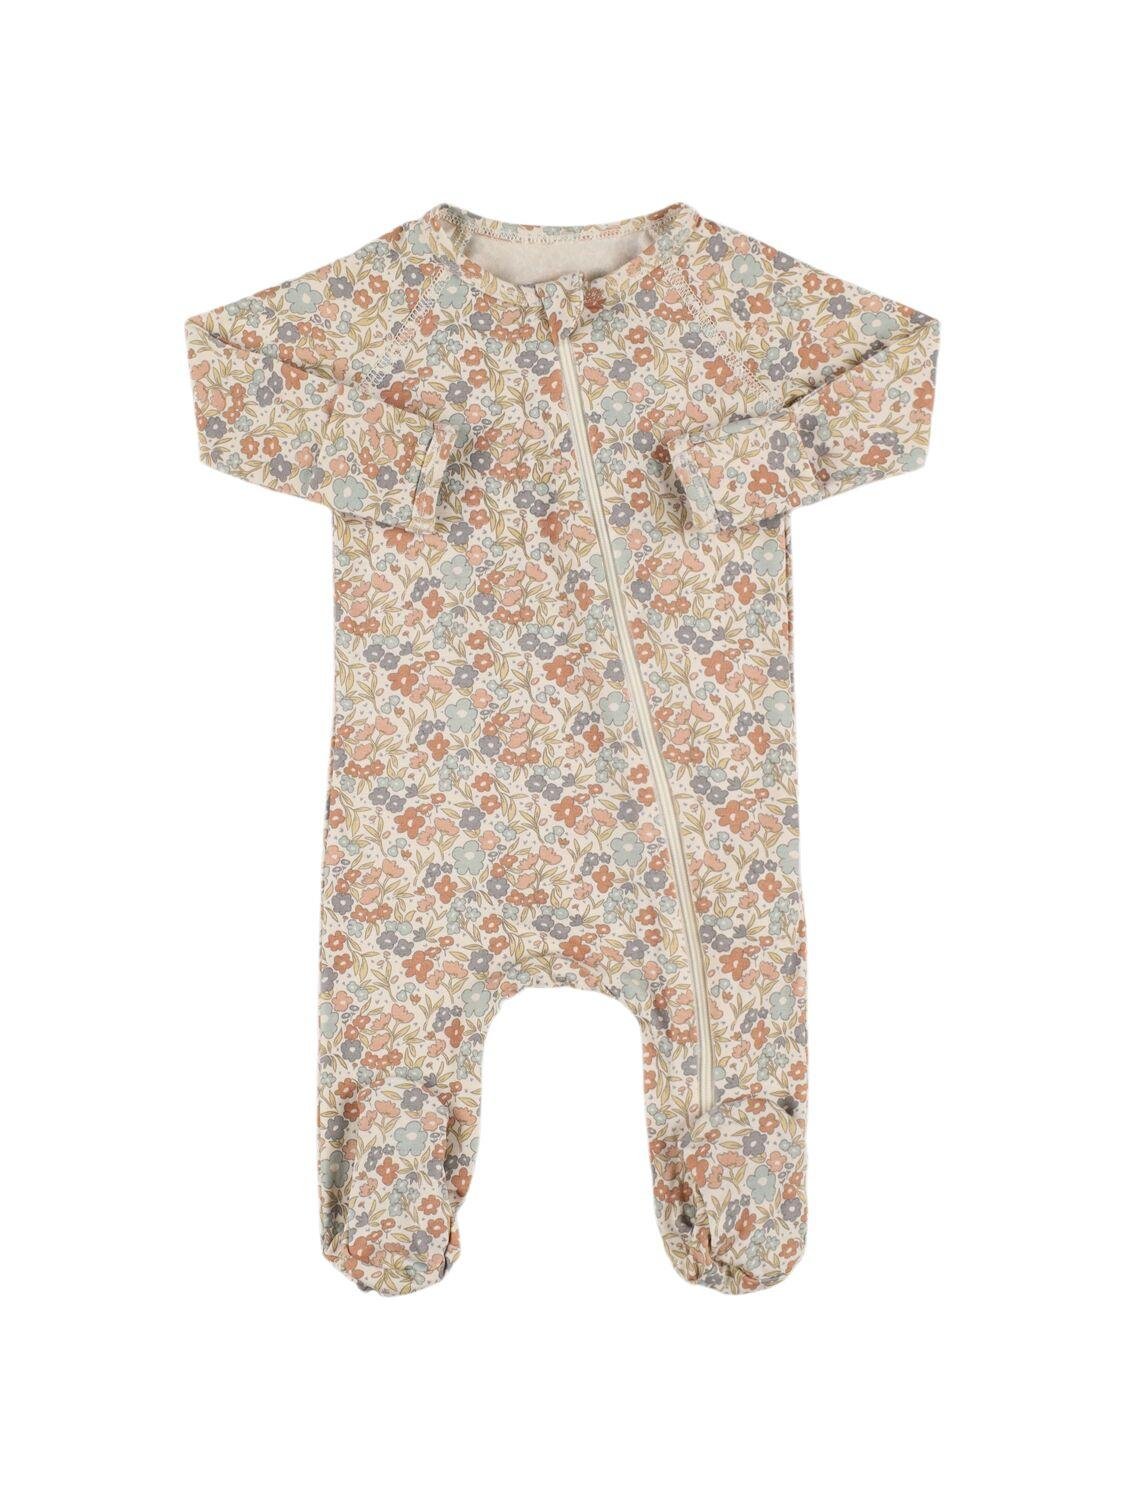 Viscose Blend Romper W/booties by QUINCY MAE